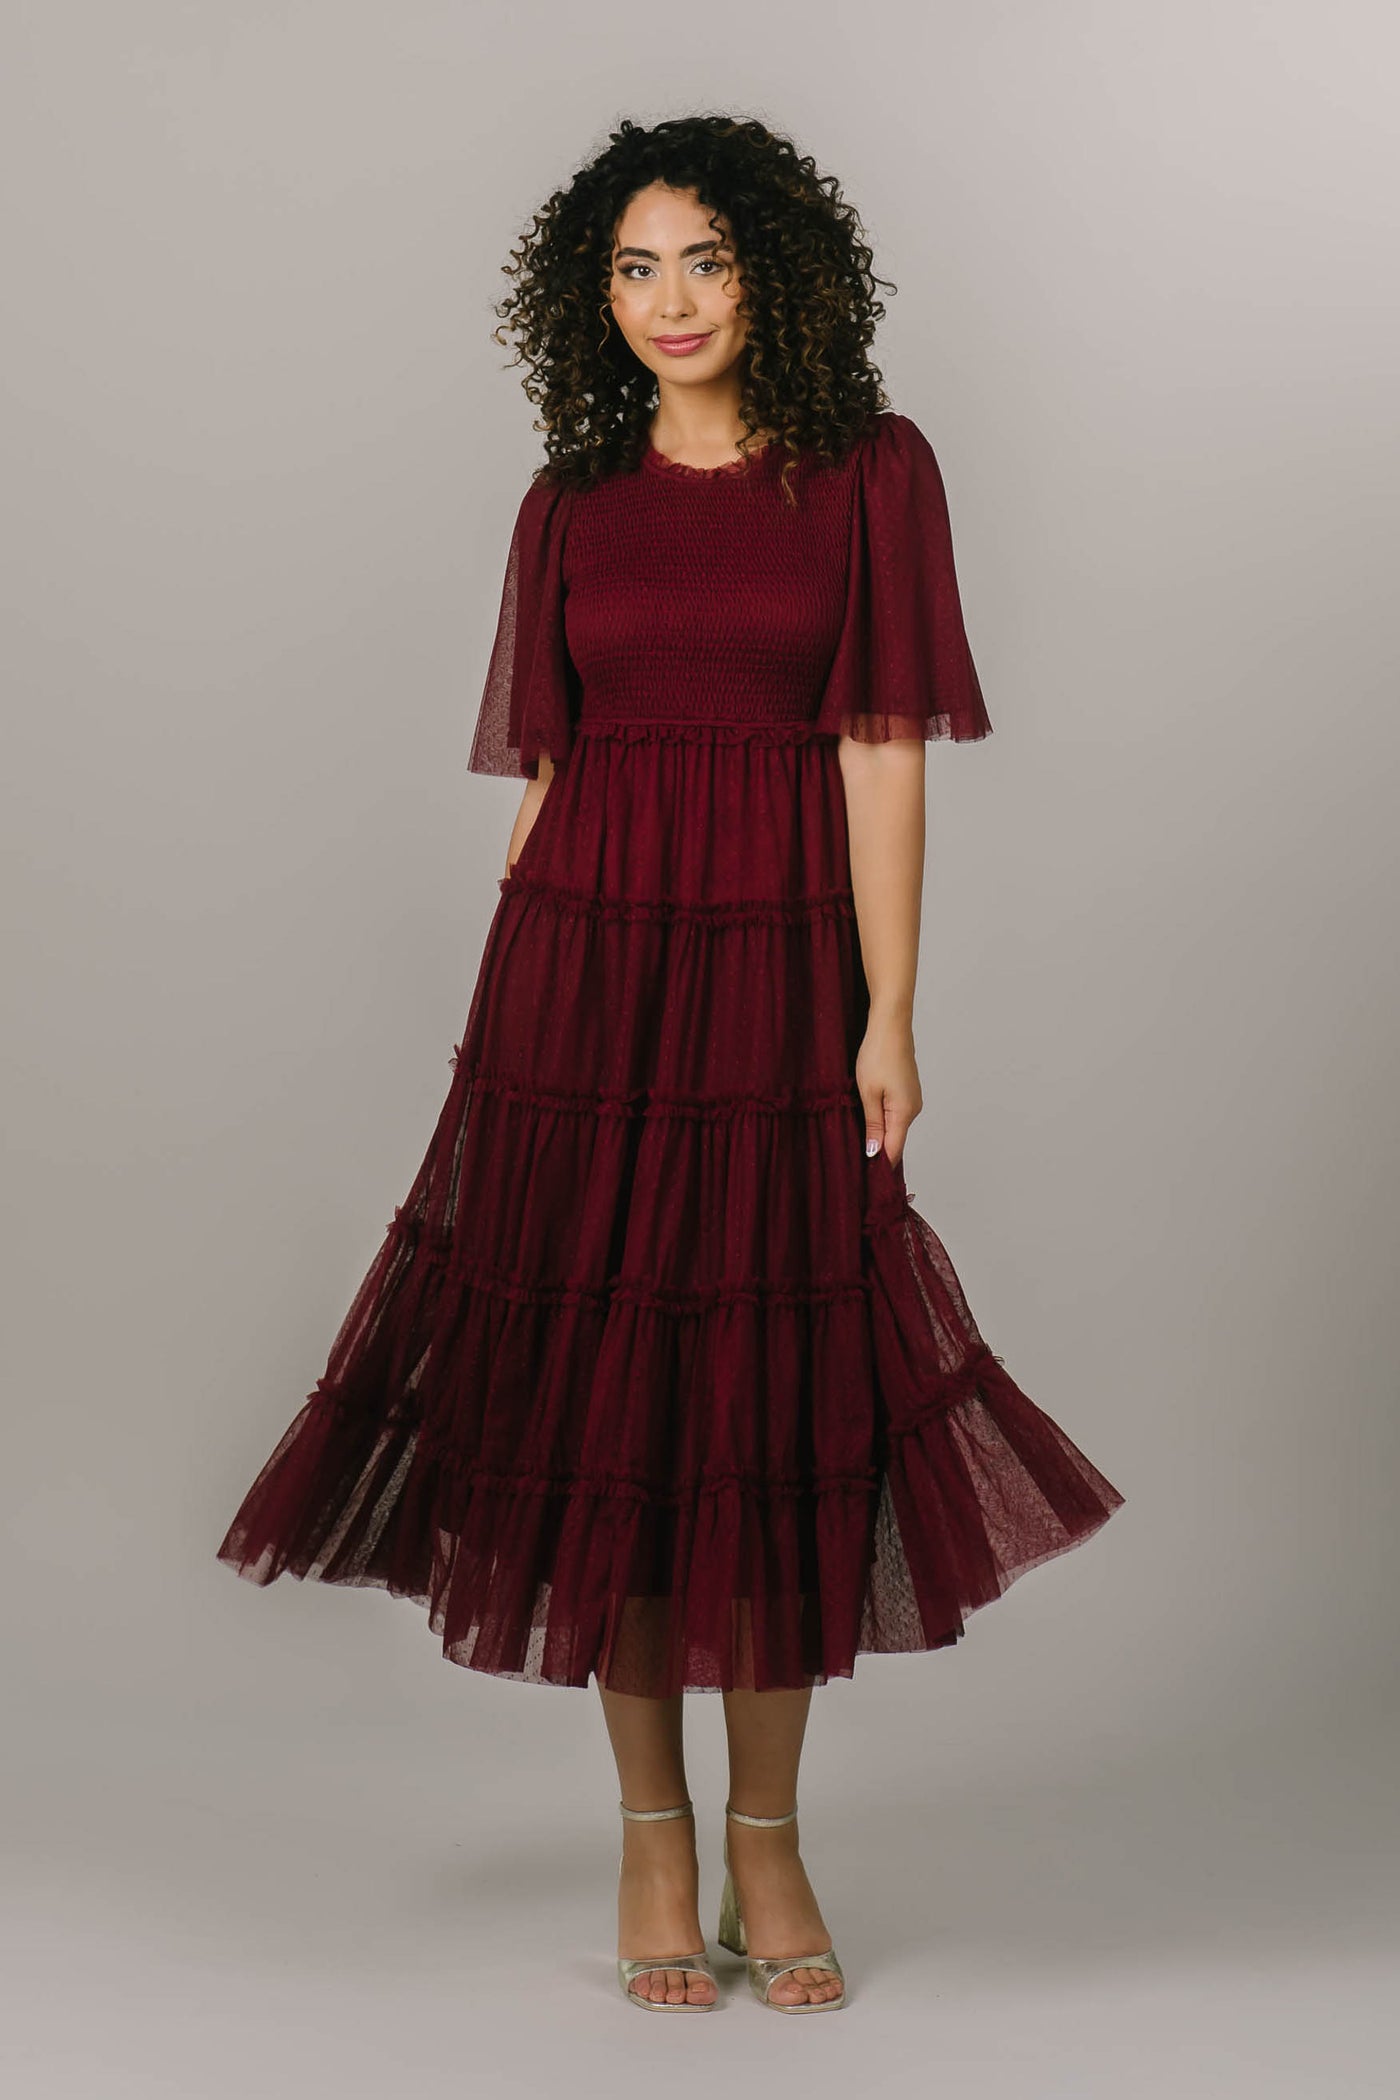 This is a modest holiday dress perfect for all holiday parties and it is a beautiful plum color.